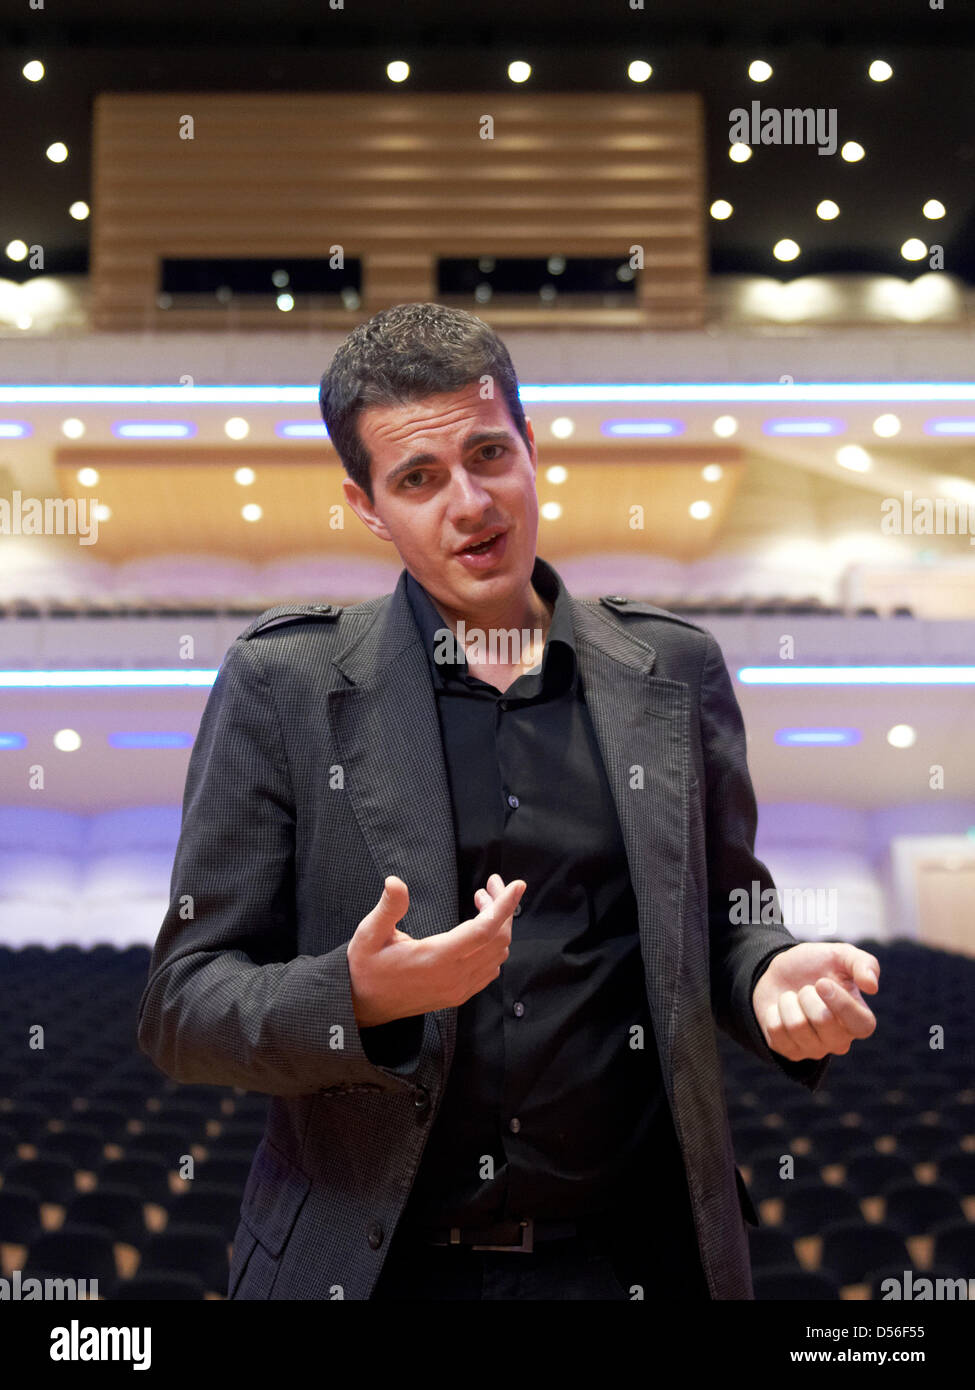 French countertenor singer Philippe Jaroussky poses in the empty aula of the concert hall in Dortmund, Germany, 17 November 2010. Jaroussky will launch his tour through Germany with an aria evening in Dortmund. Further stops are Baden-Baden, Nuremberg, Munich, Hamburg and Berlin. Photo: Bernd Thissen Stock Photo